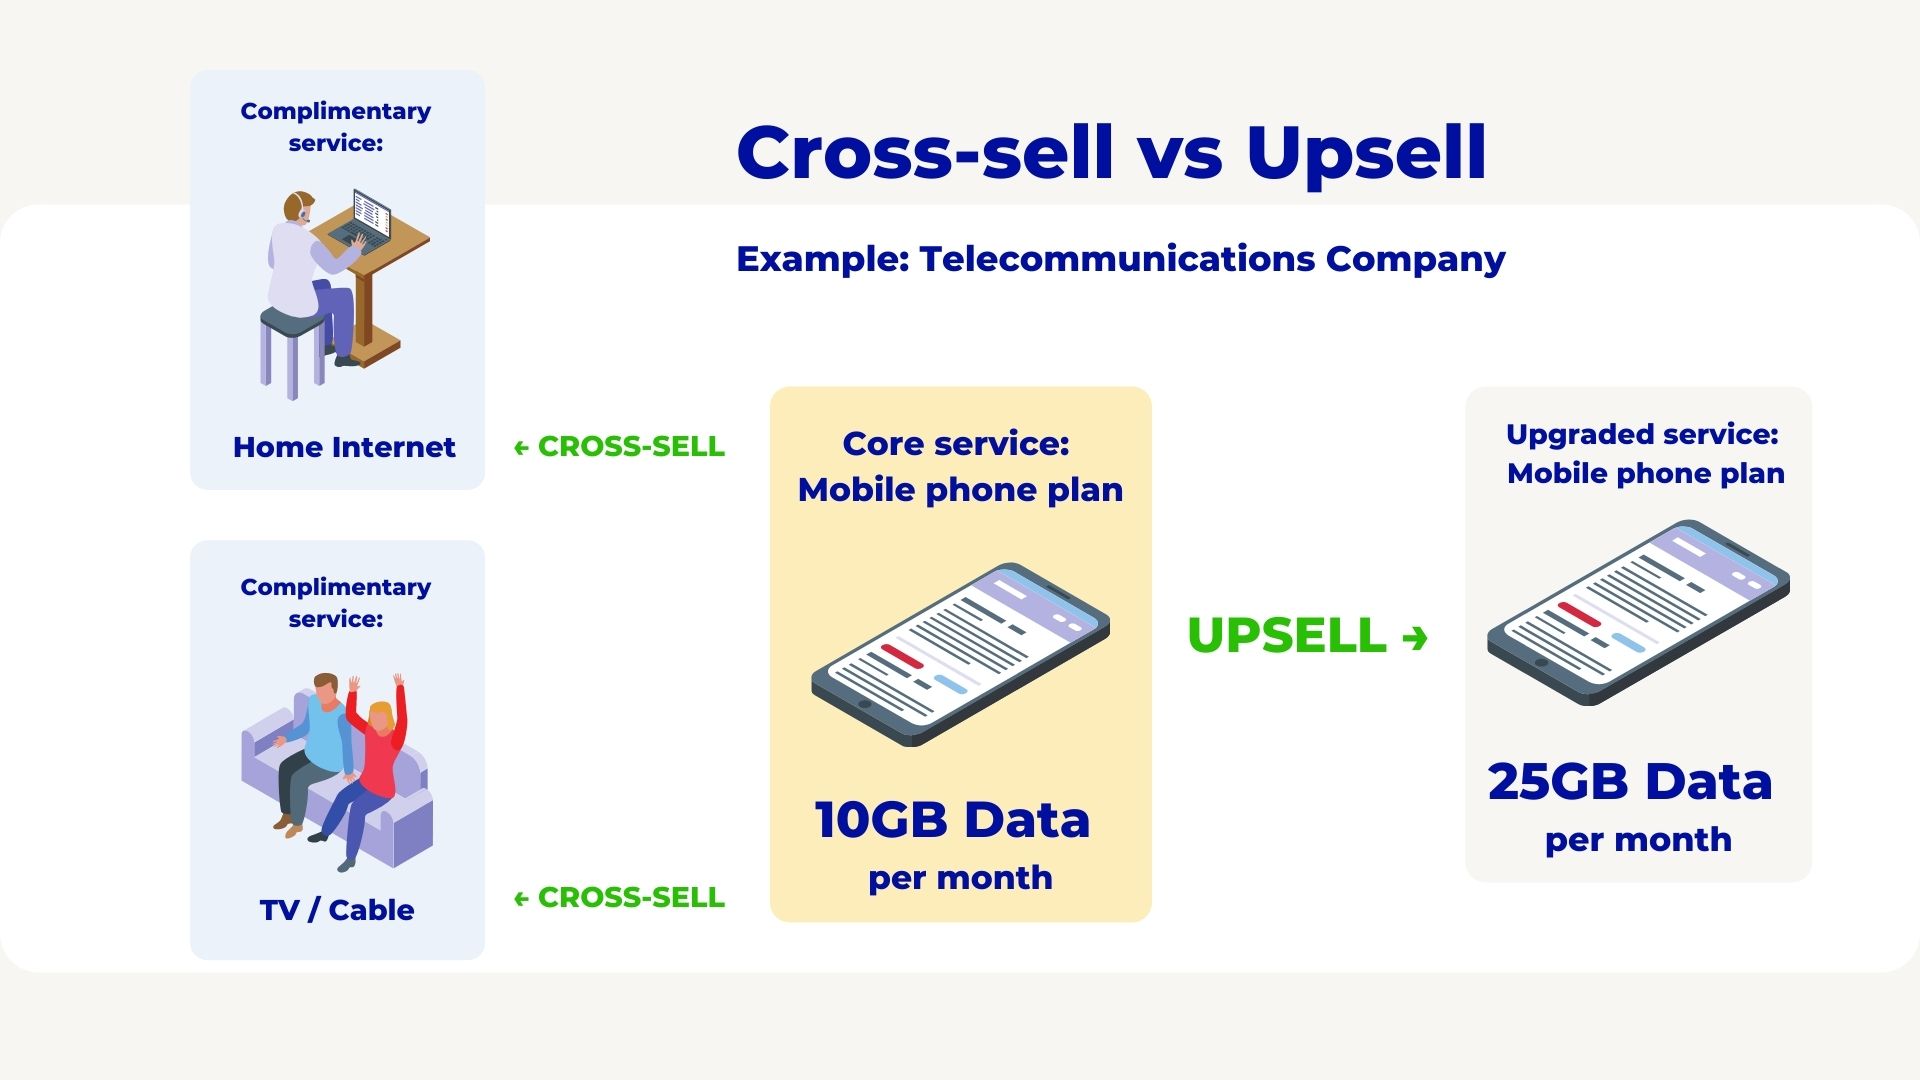 Cross-sell & Upsell Opportunities to Maximize Customer LTV